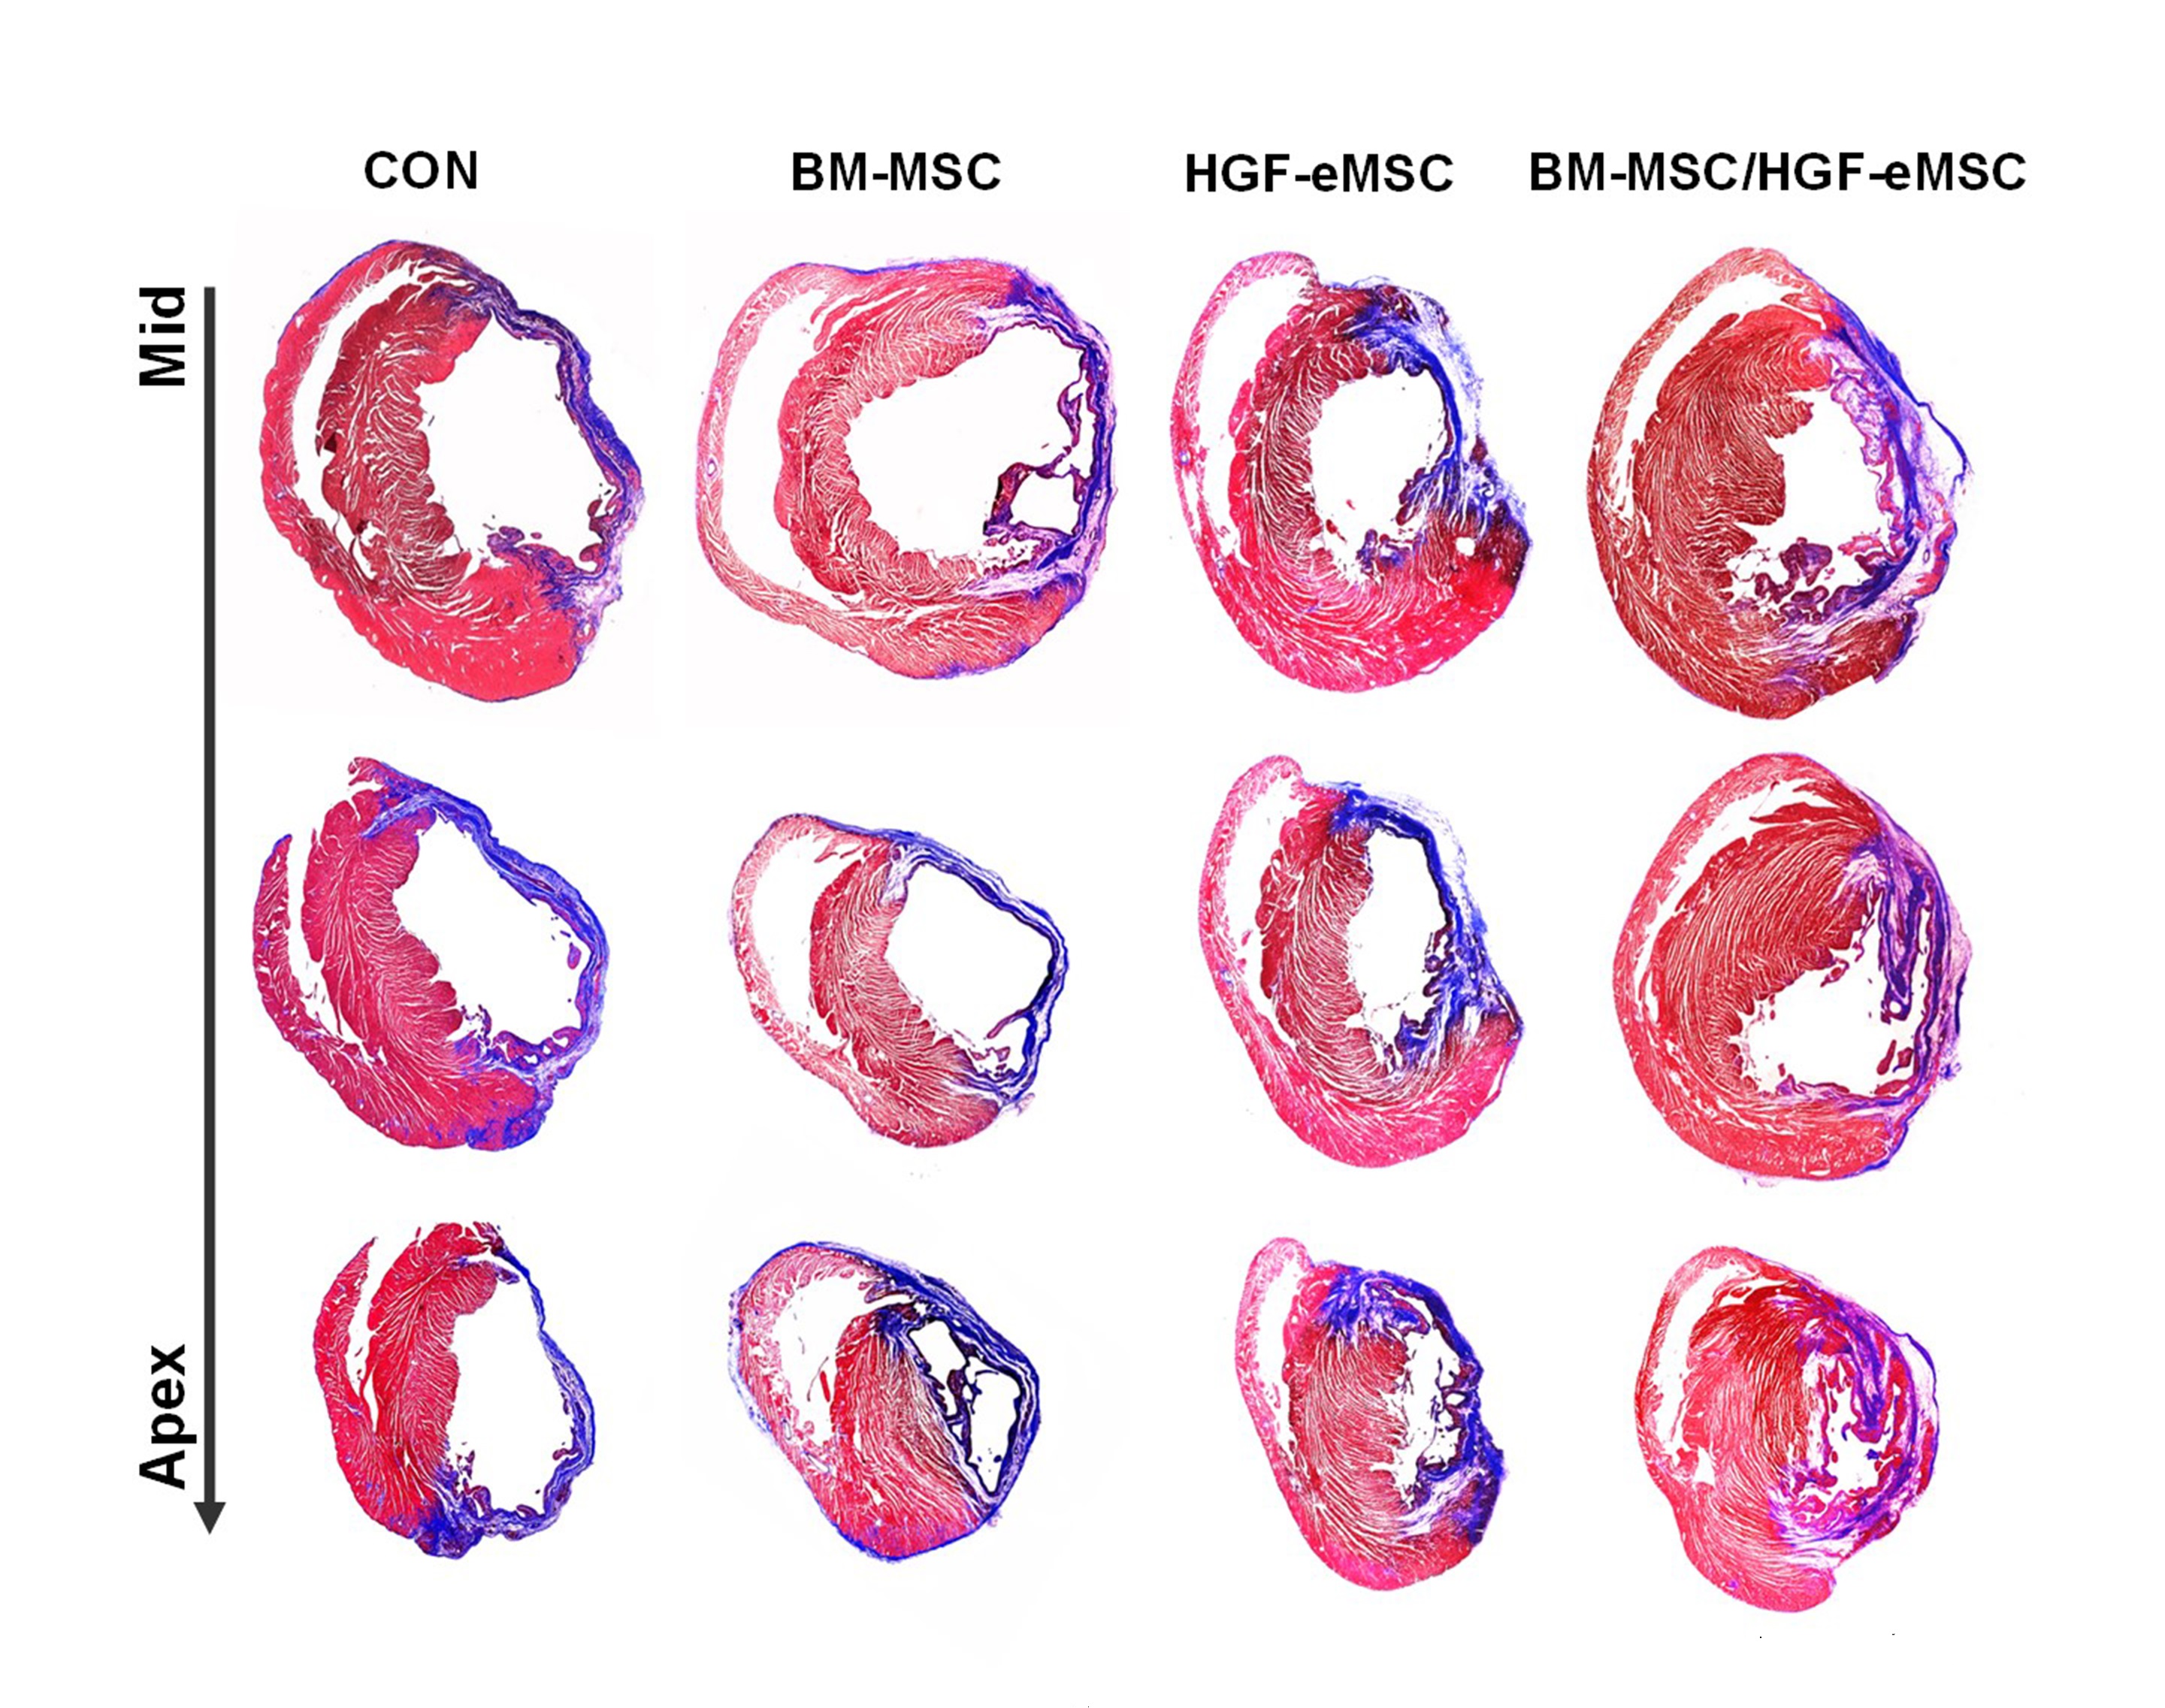 Heart tissue comparison with or without priming